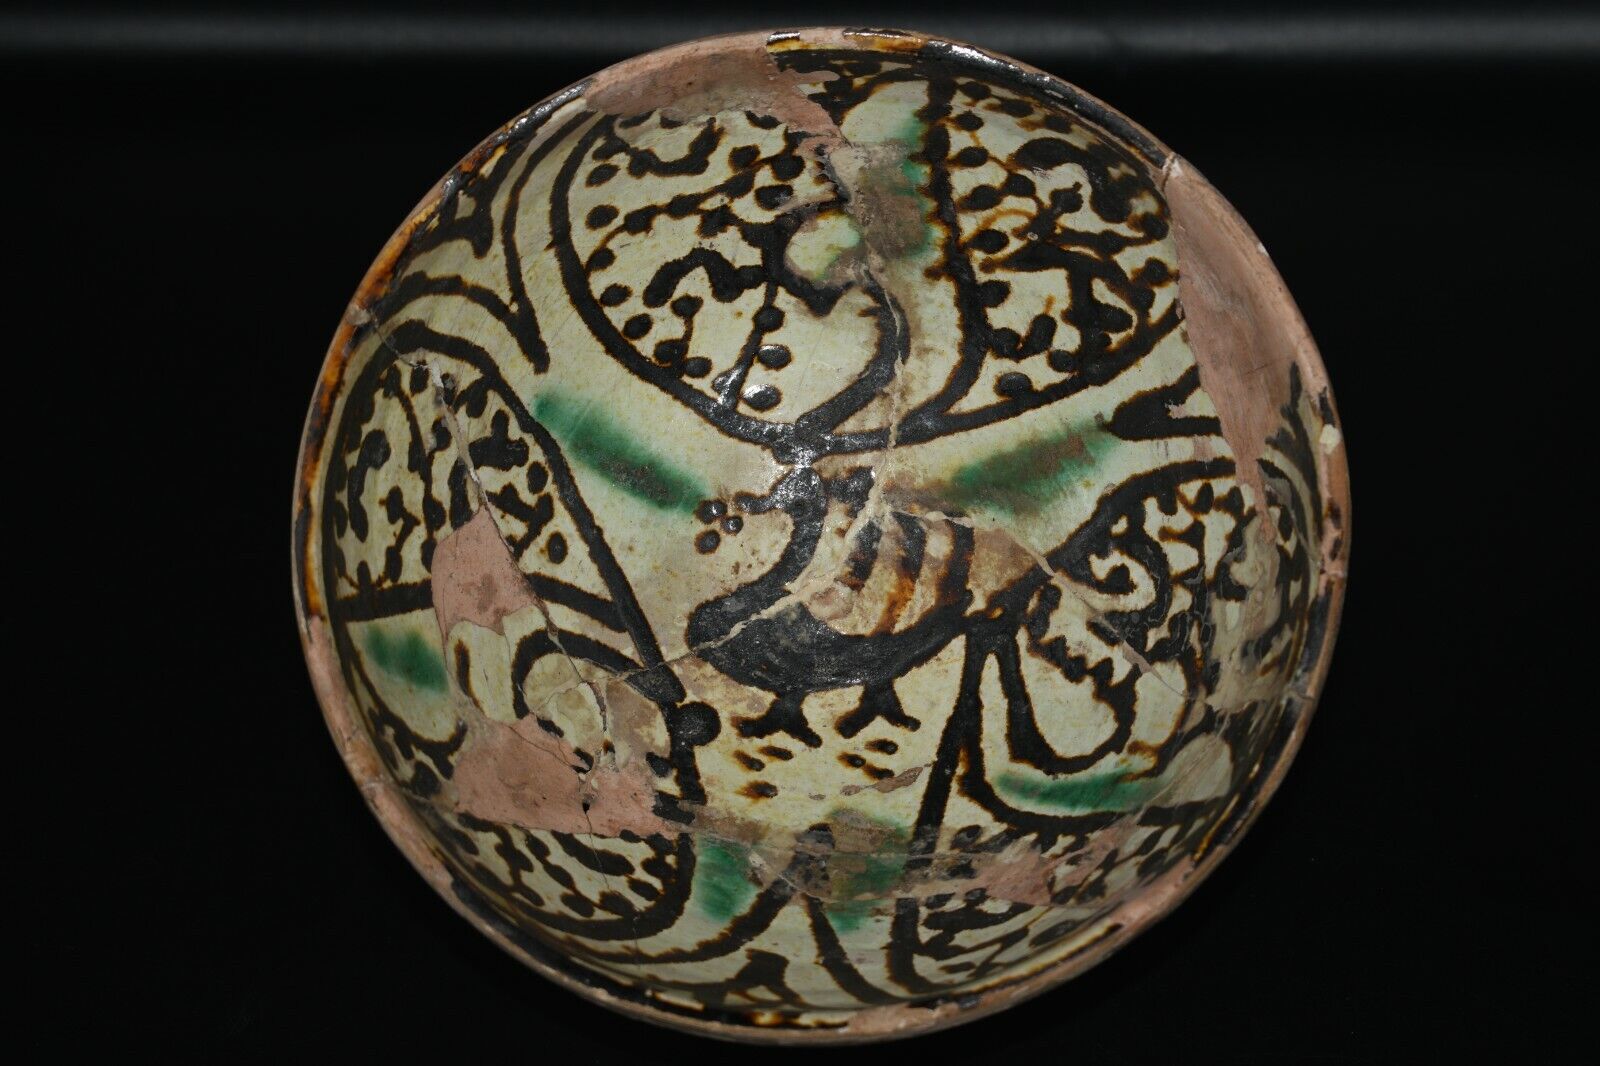 Ancient 9th Century Islamic Ceramic Bowl with Bird & Patterns from Nishapur